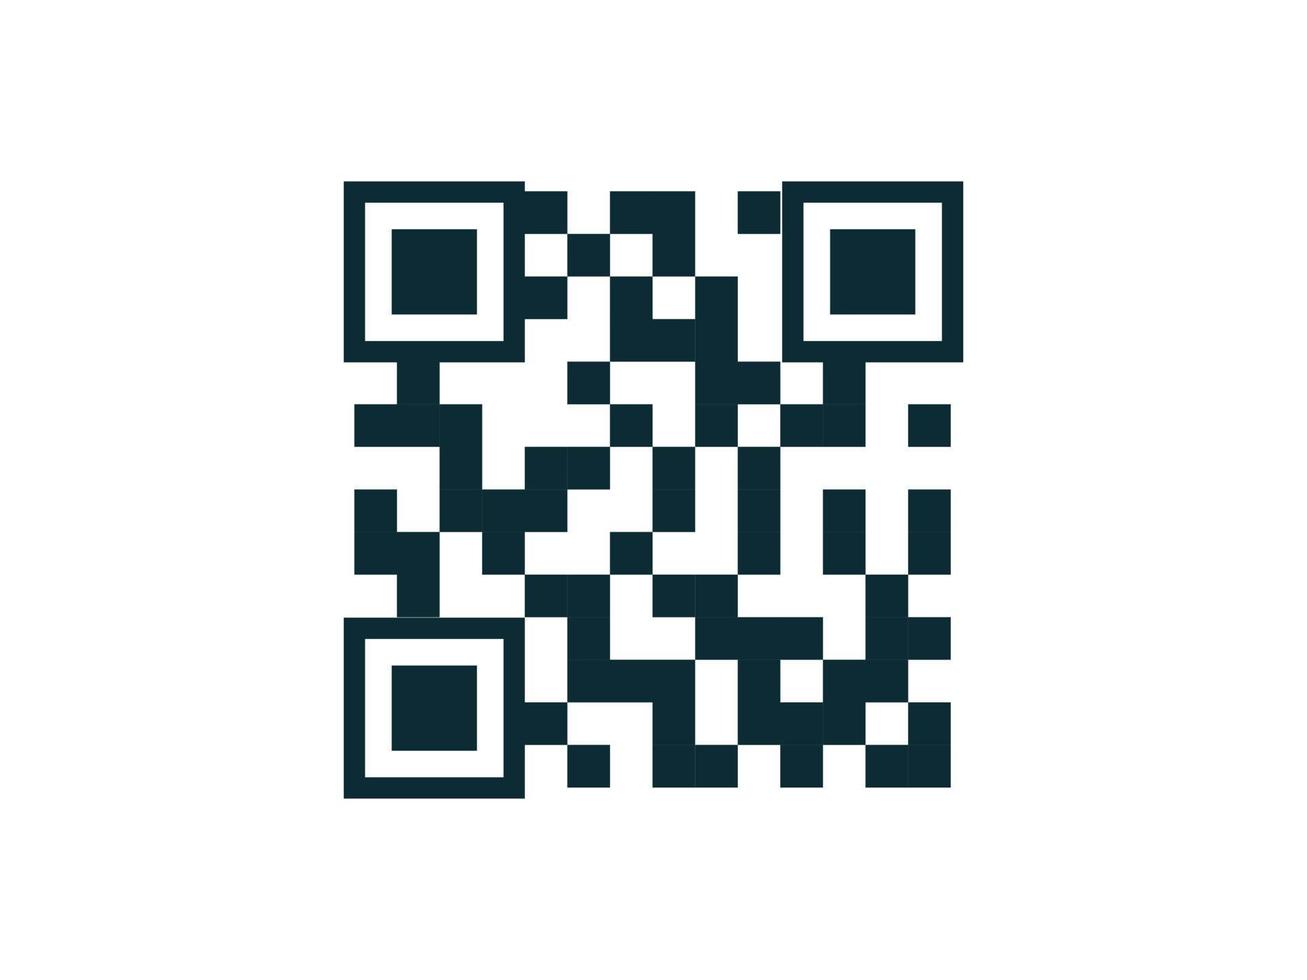 QR code icon for smartphone, Apps. The symbol for scanning encrypted information. Vector illustration